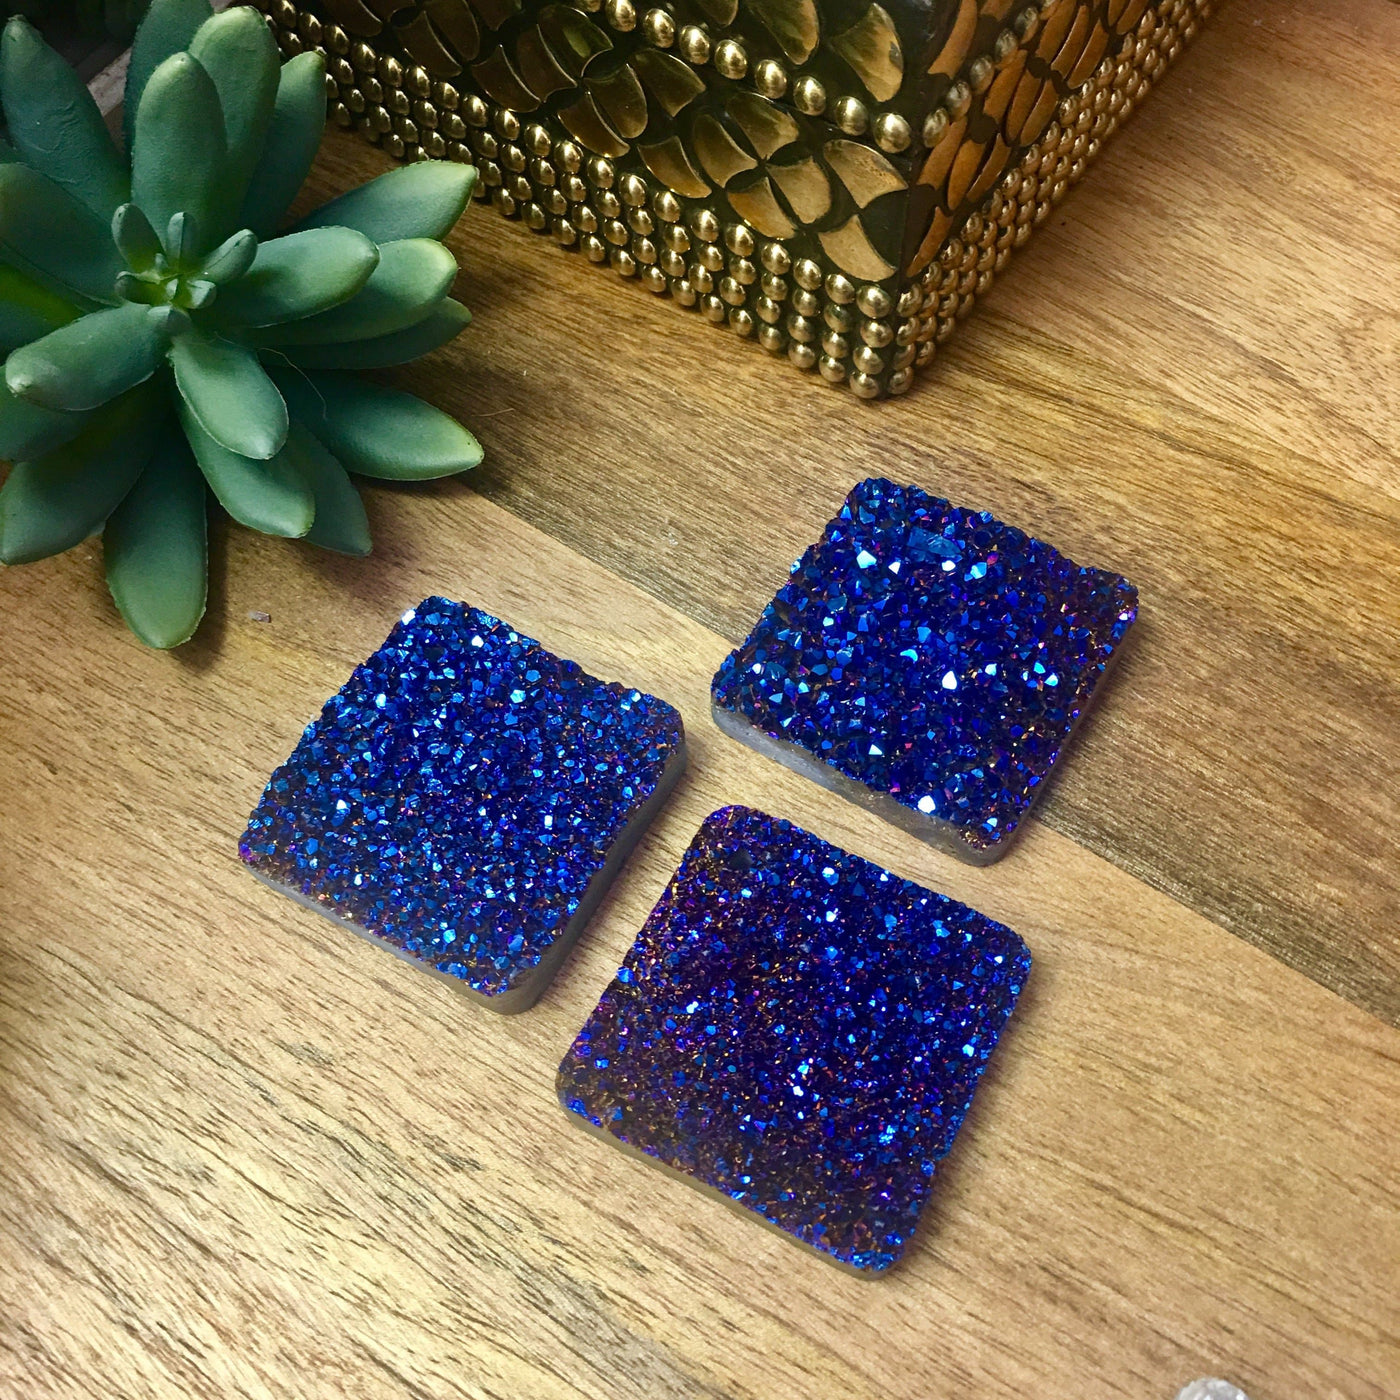 3 druzy diamond shaped beads on wooden table with plant in the background